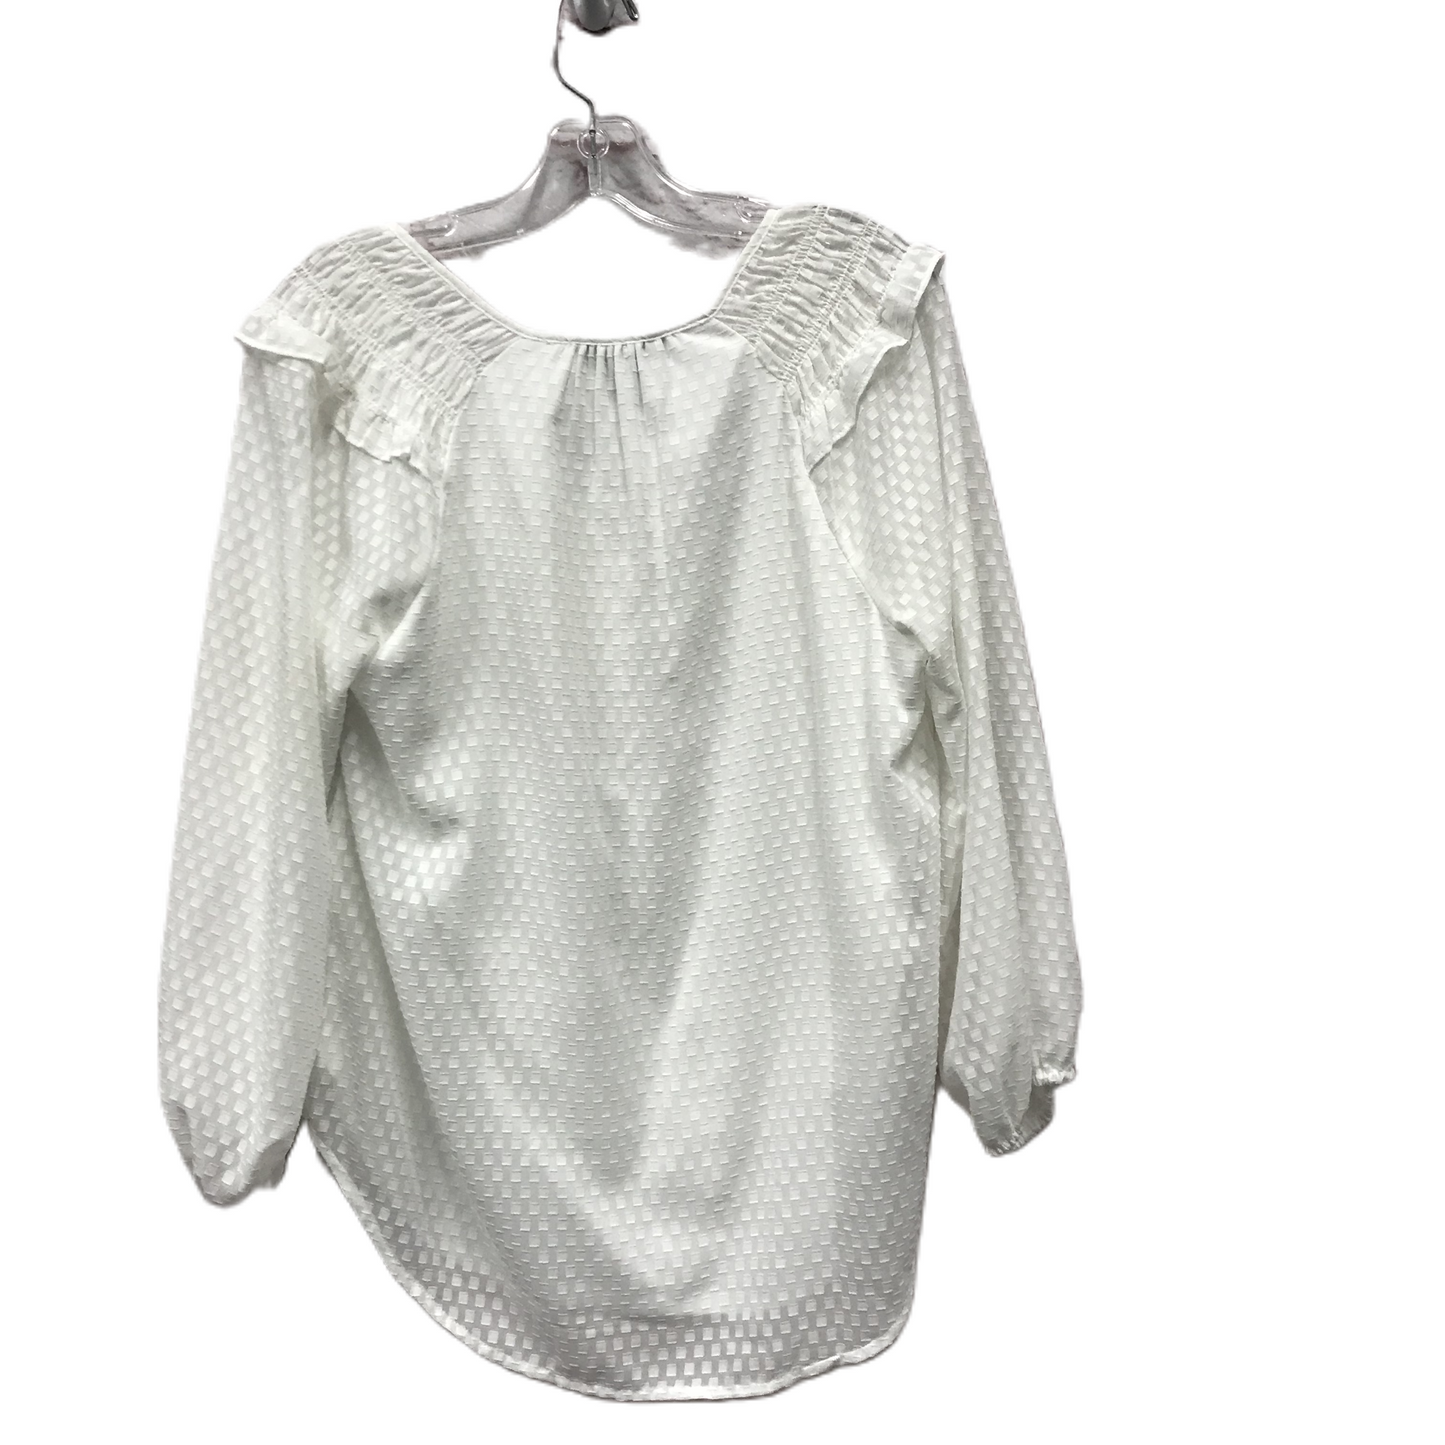 White Top Long Sleeve By Simply Vera, Size: M